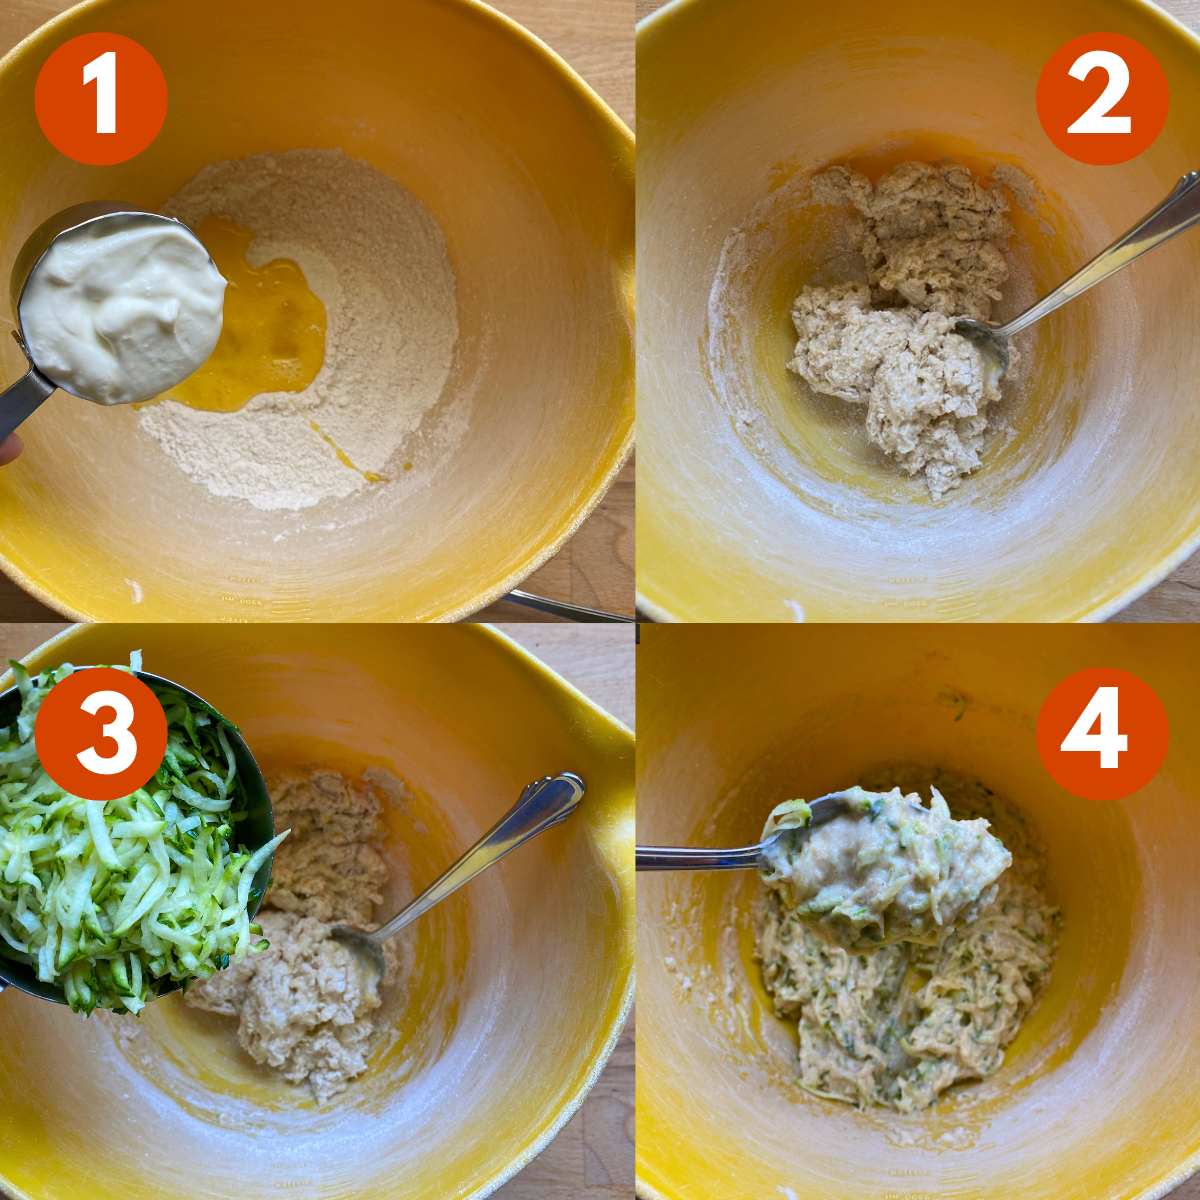 Collage of steps to make healthy zucchini muffins: 1) Yogurt being added to bowl with egg and dry mix. 2) Wet and dry ingredients mixed. 3) Zucchini shreds being added to bowl. 4) Spoon lifting batter out of the bowl